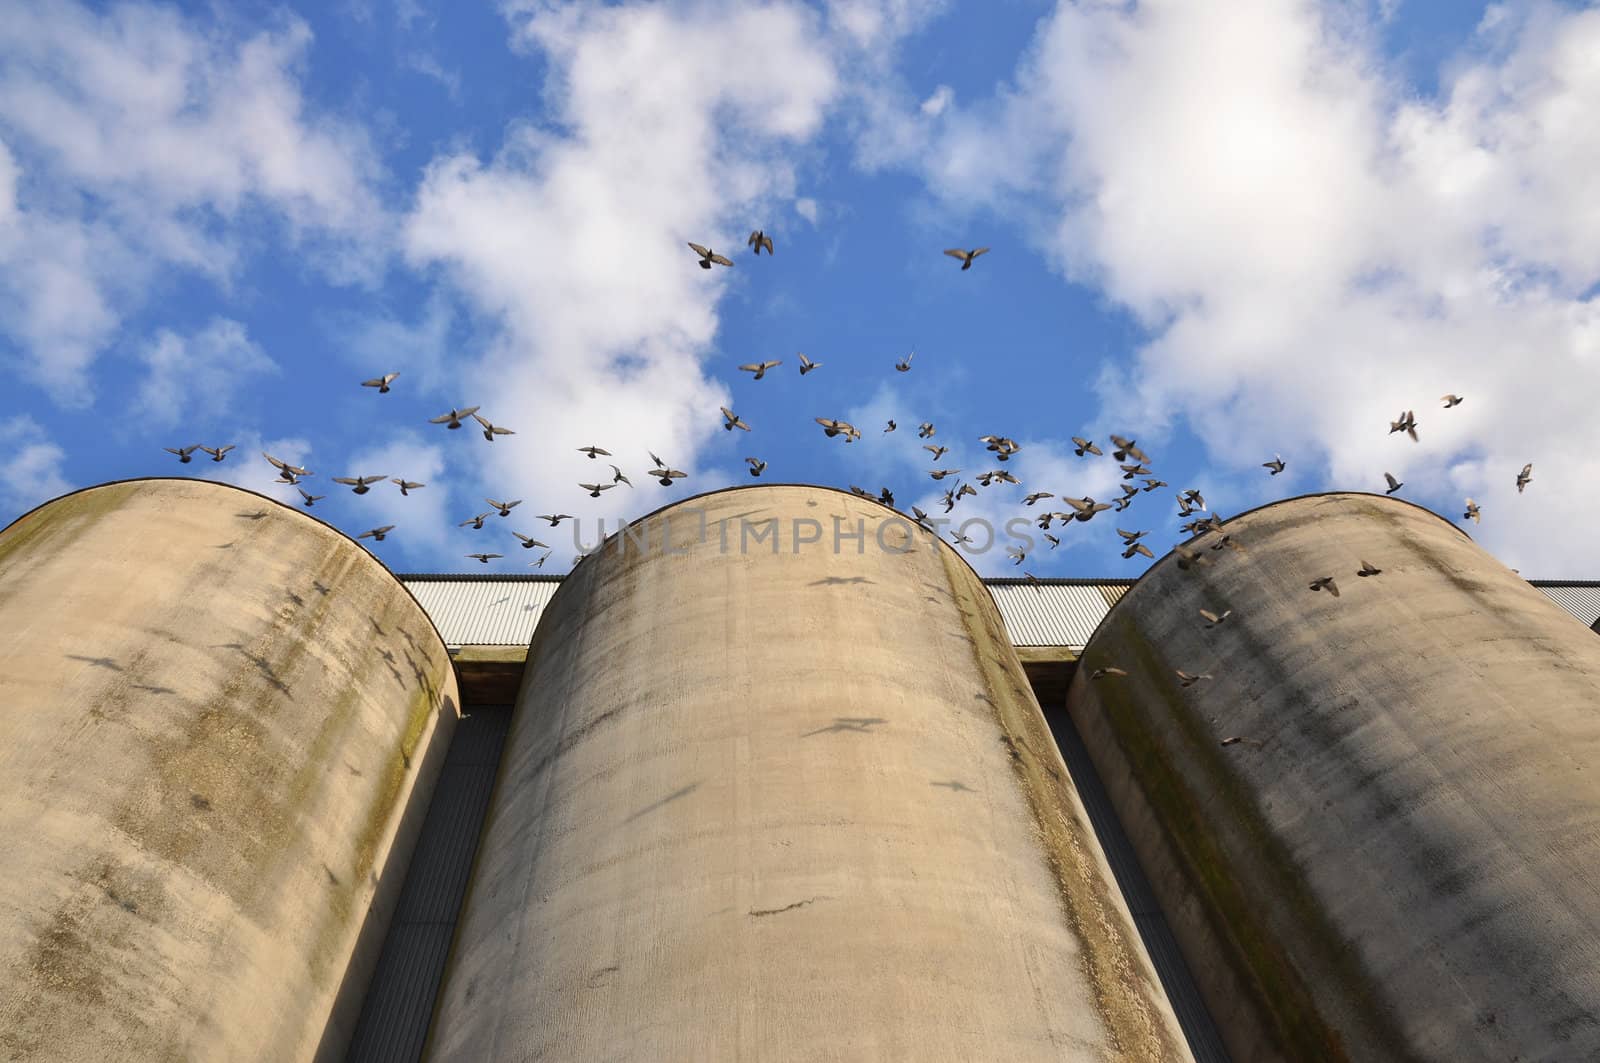 Three old silos with doves in flight.